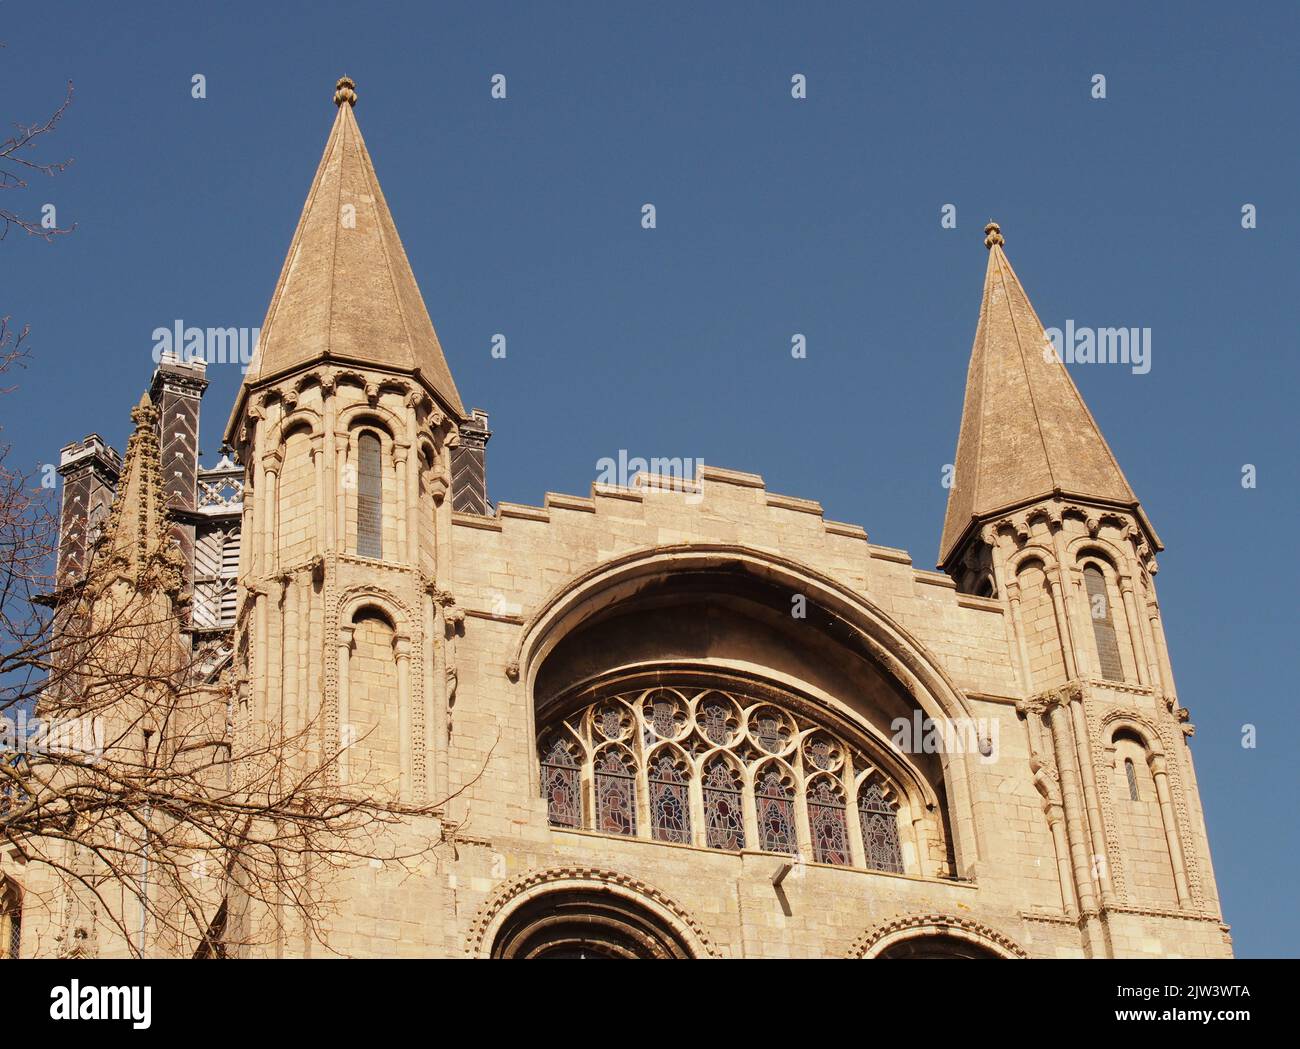 A view showing towers, spires and turrets of Ely cathedral, Cambridgeshire, England showing the intricate magnificent detail of the building Stock Photo